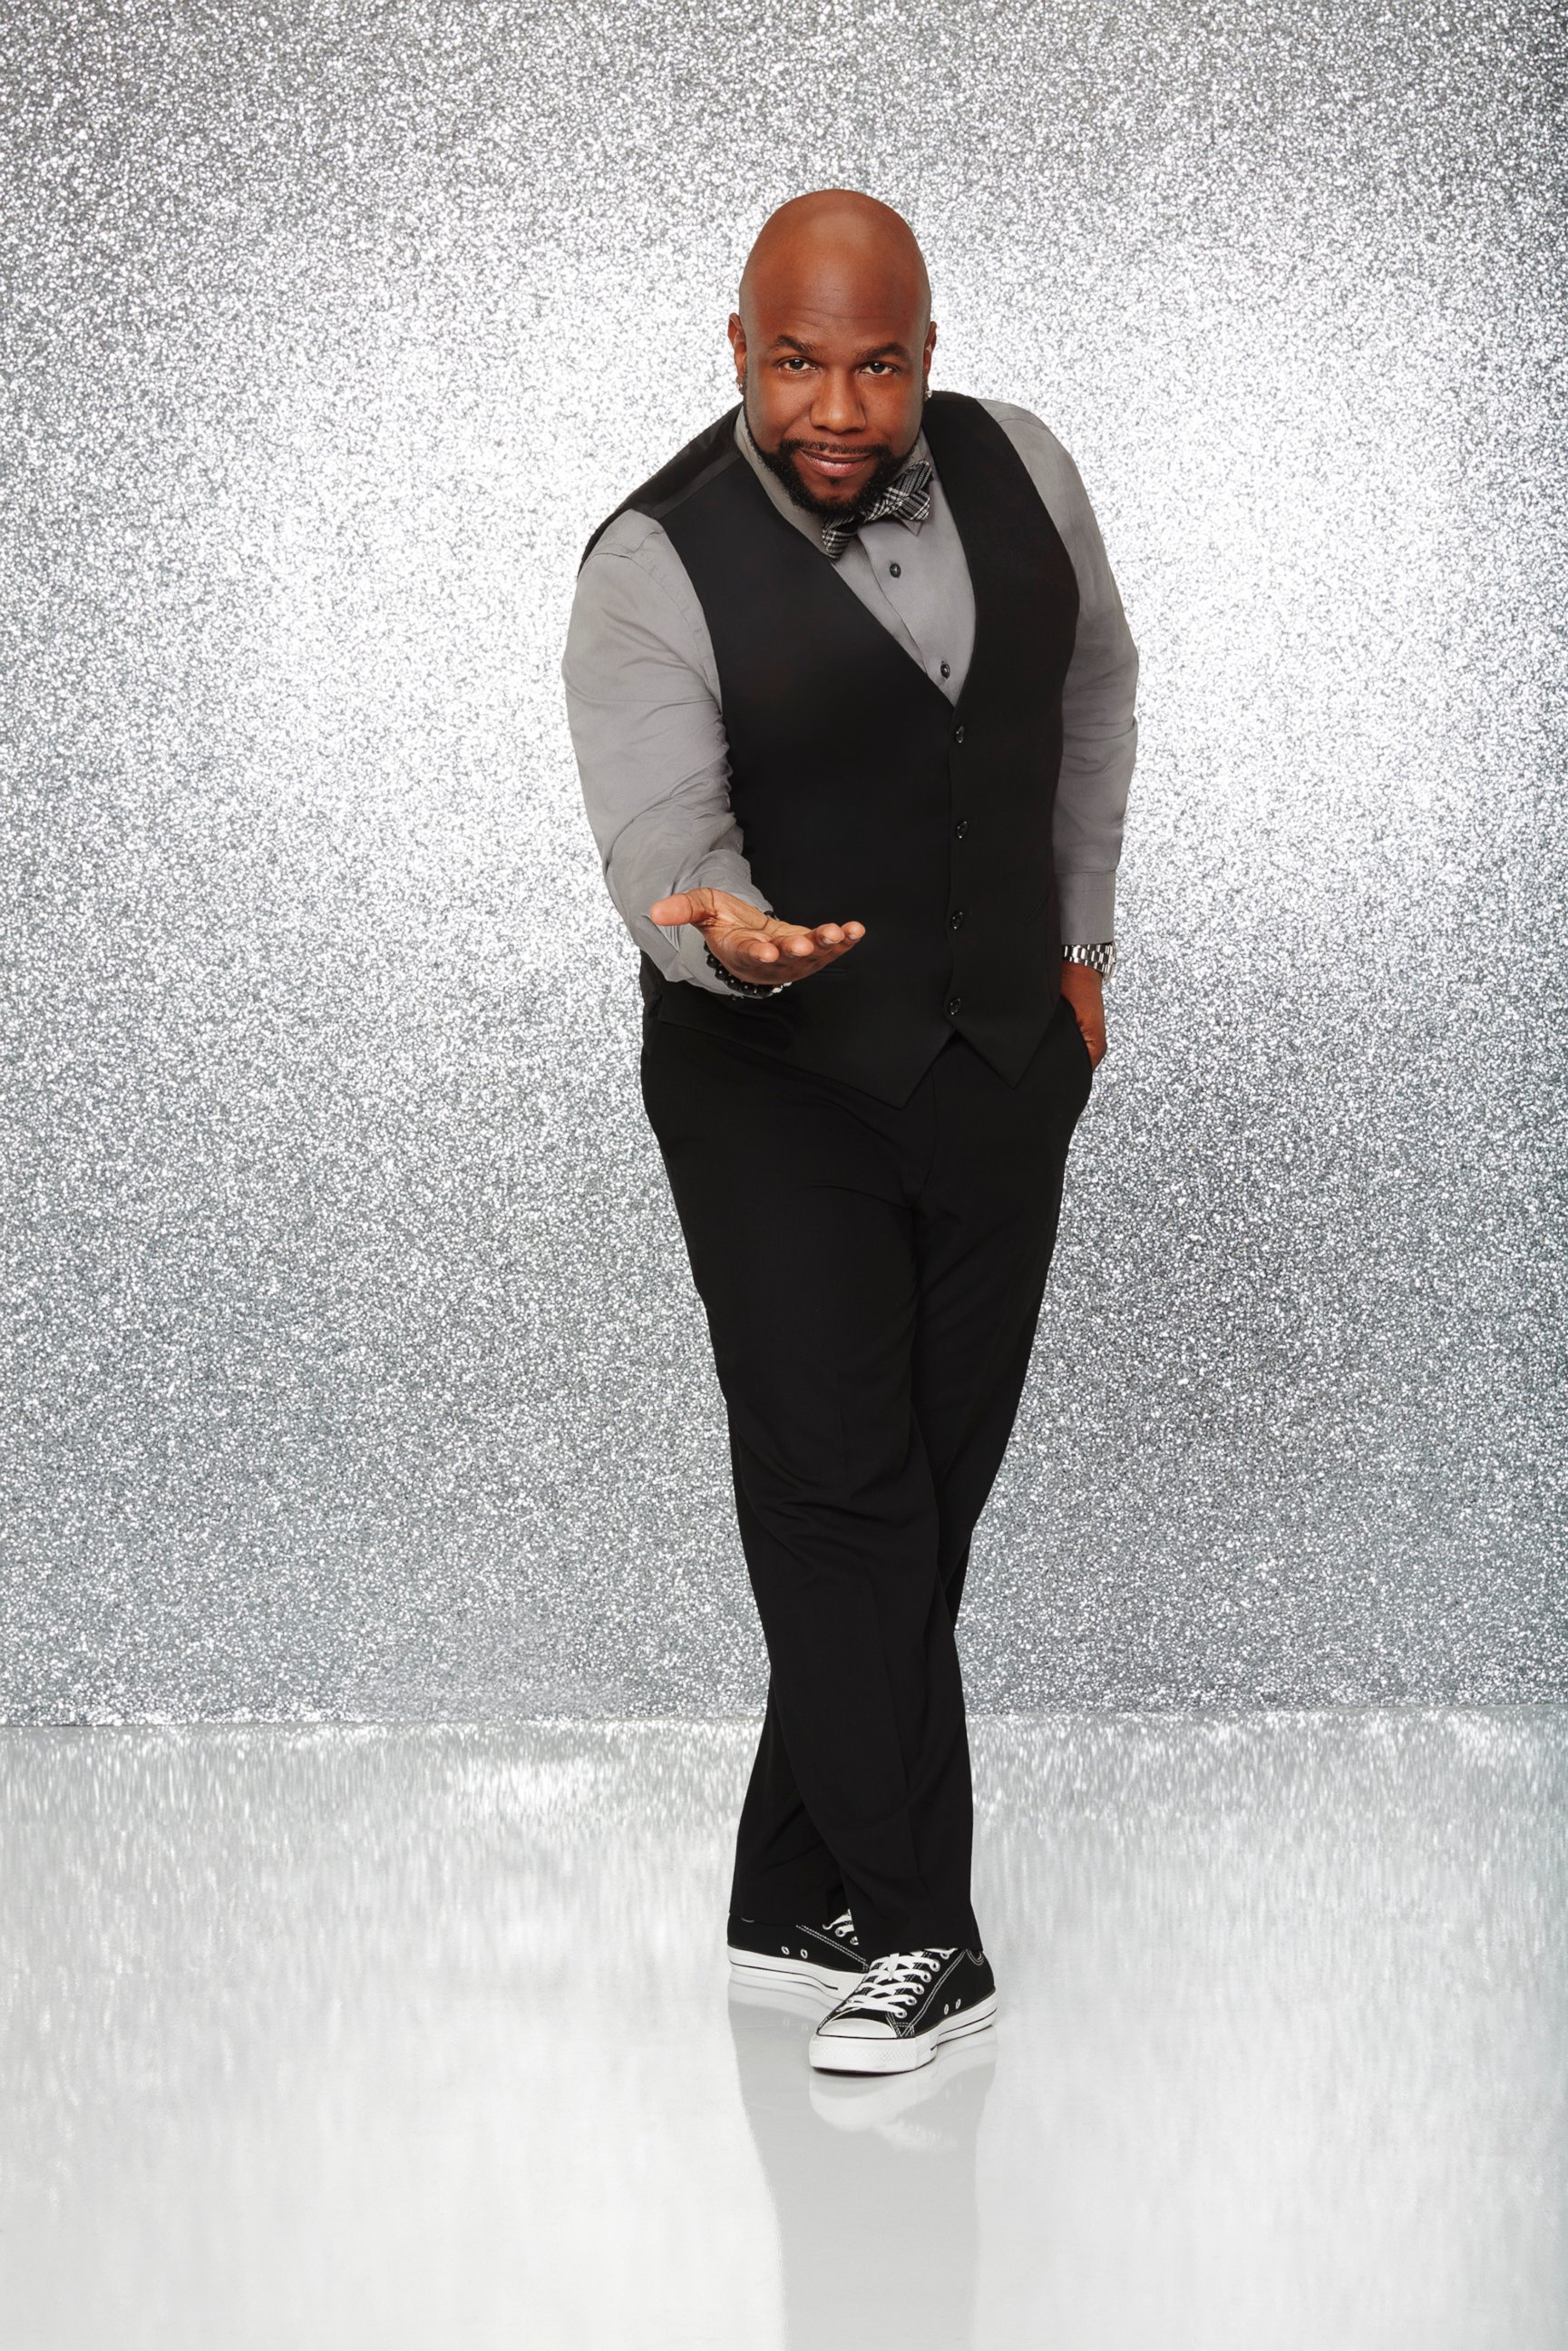 PHOTO: Wanya Morris and the rest of the stars will grace the ballroom floor for the first time on live national television with their professional partners during the two-hour season premiere of "Dancing with the Stars," on Monday, March, 21, 2016.